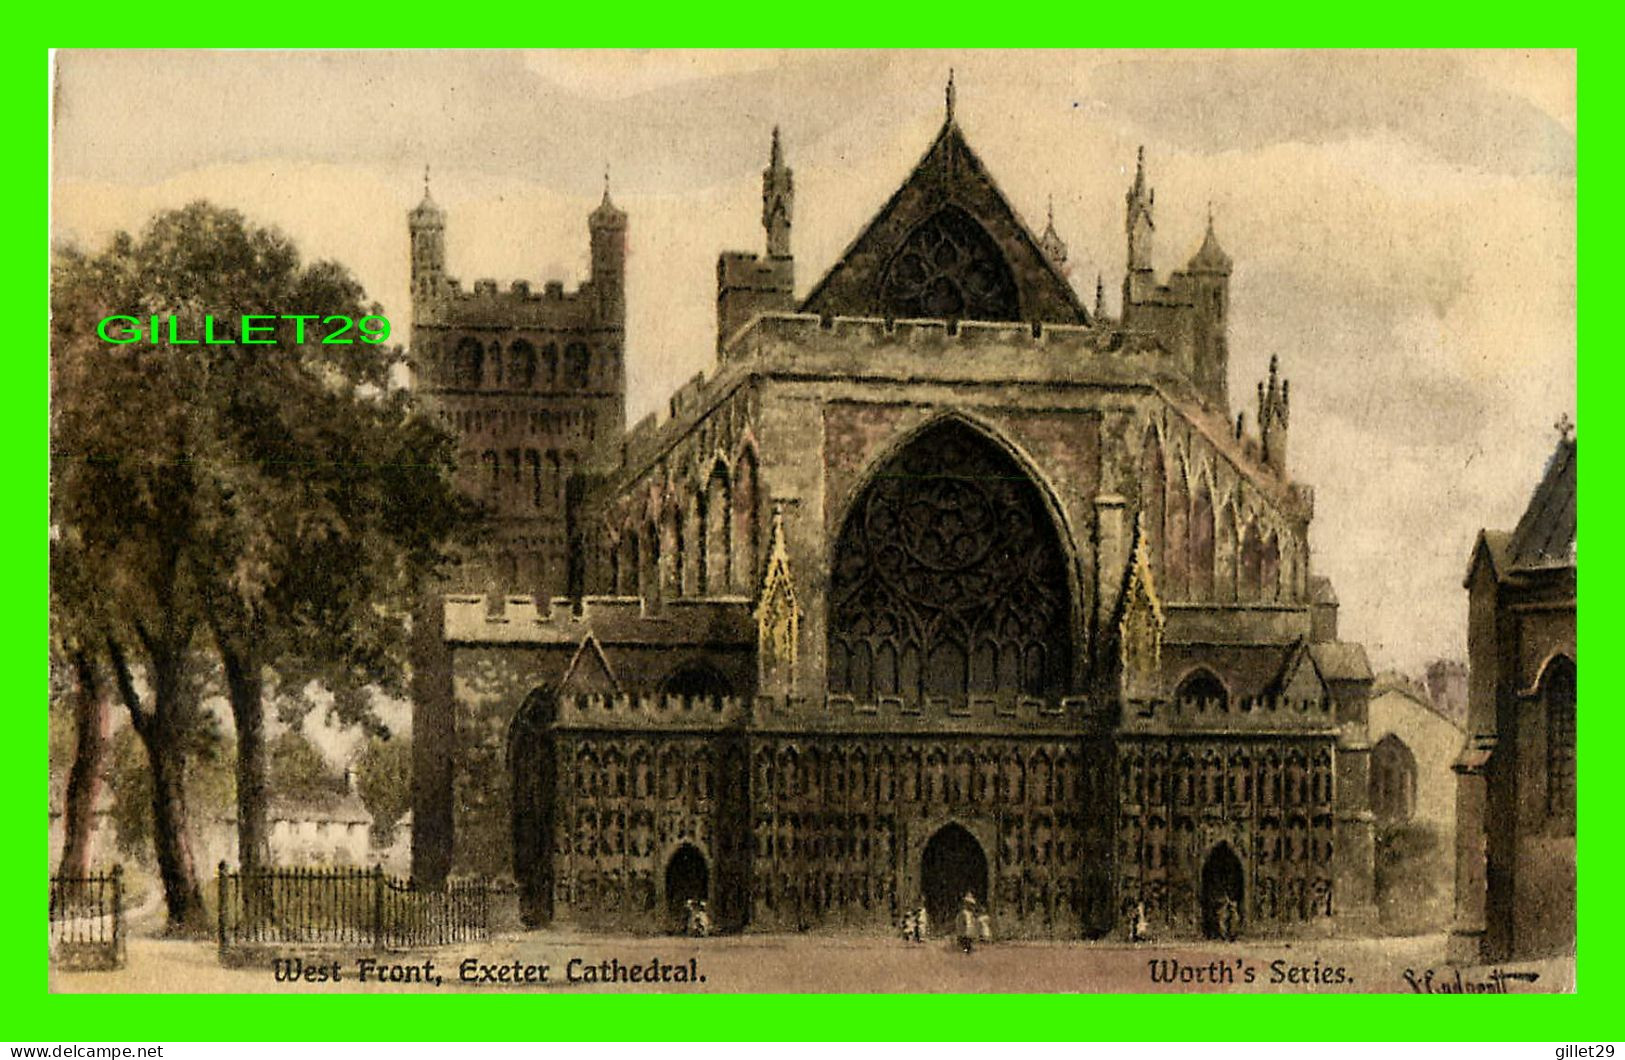 EXETER, DEVON, UK - WEST FRONT, EXETER CATHEDRAL -  WORTH'S SERIES - THE ROUGEMONT HOTEL - - Exeter